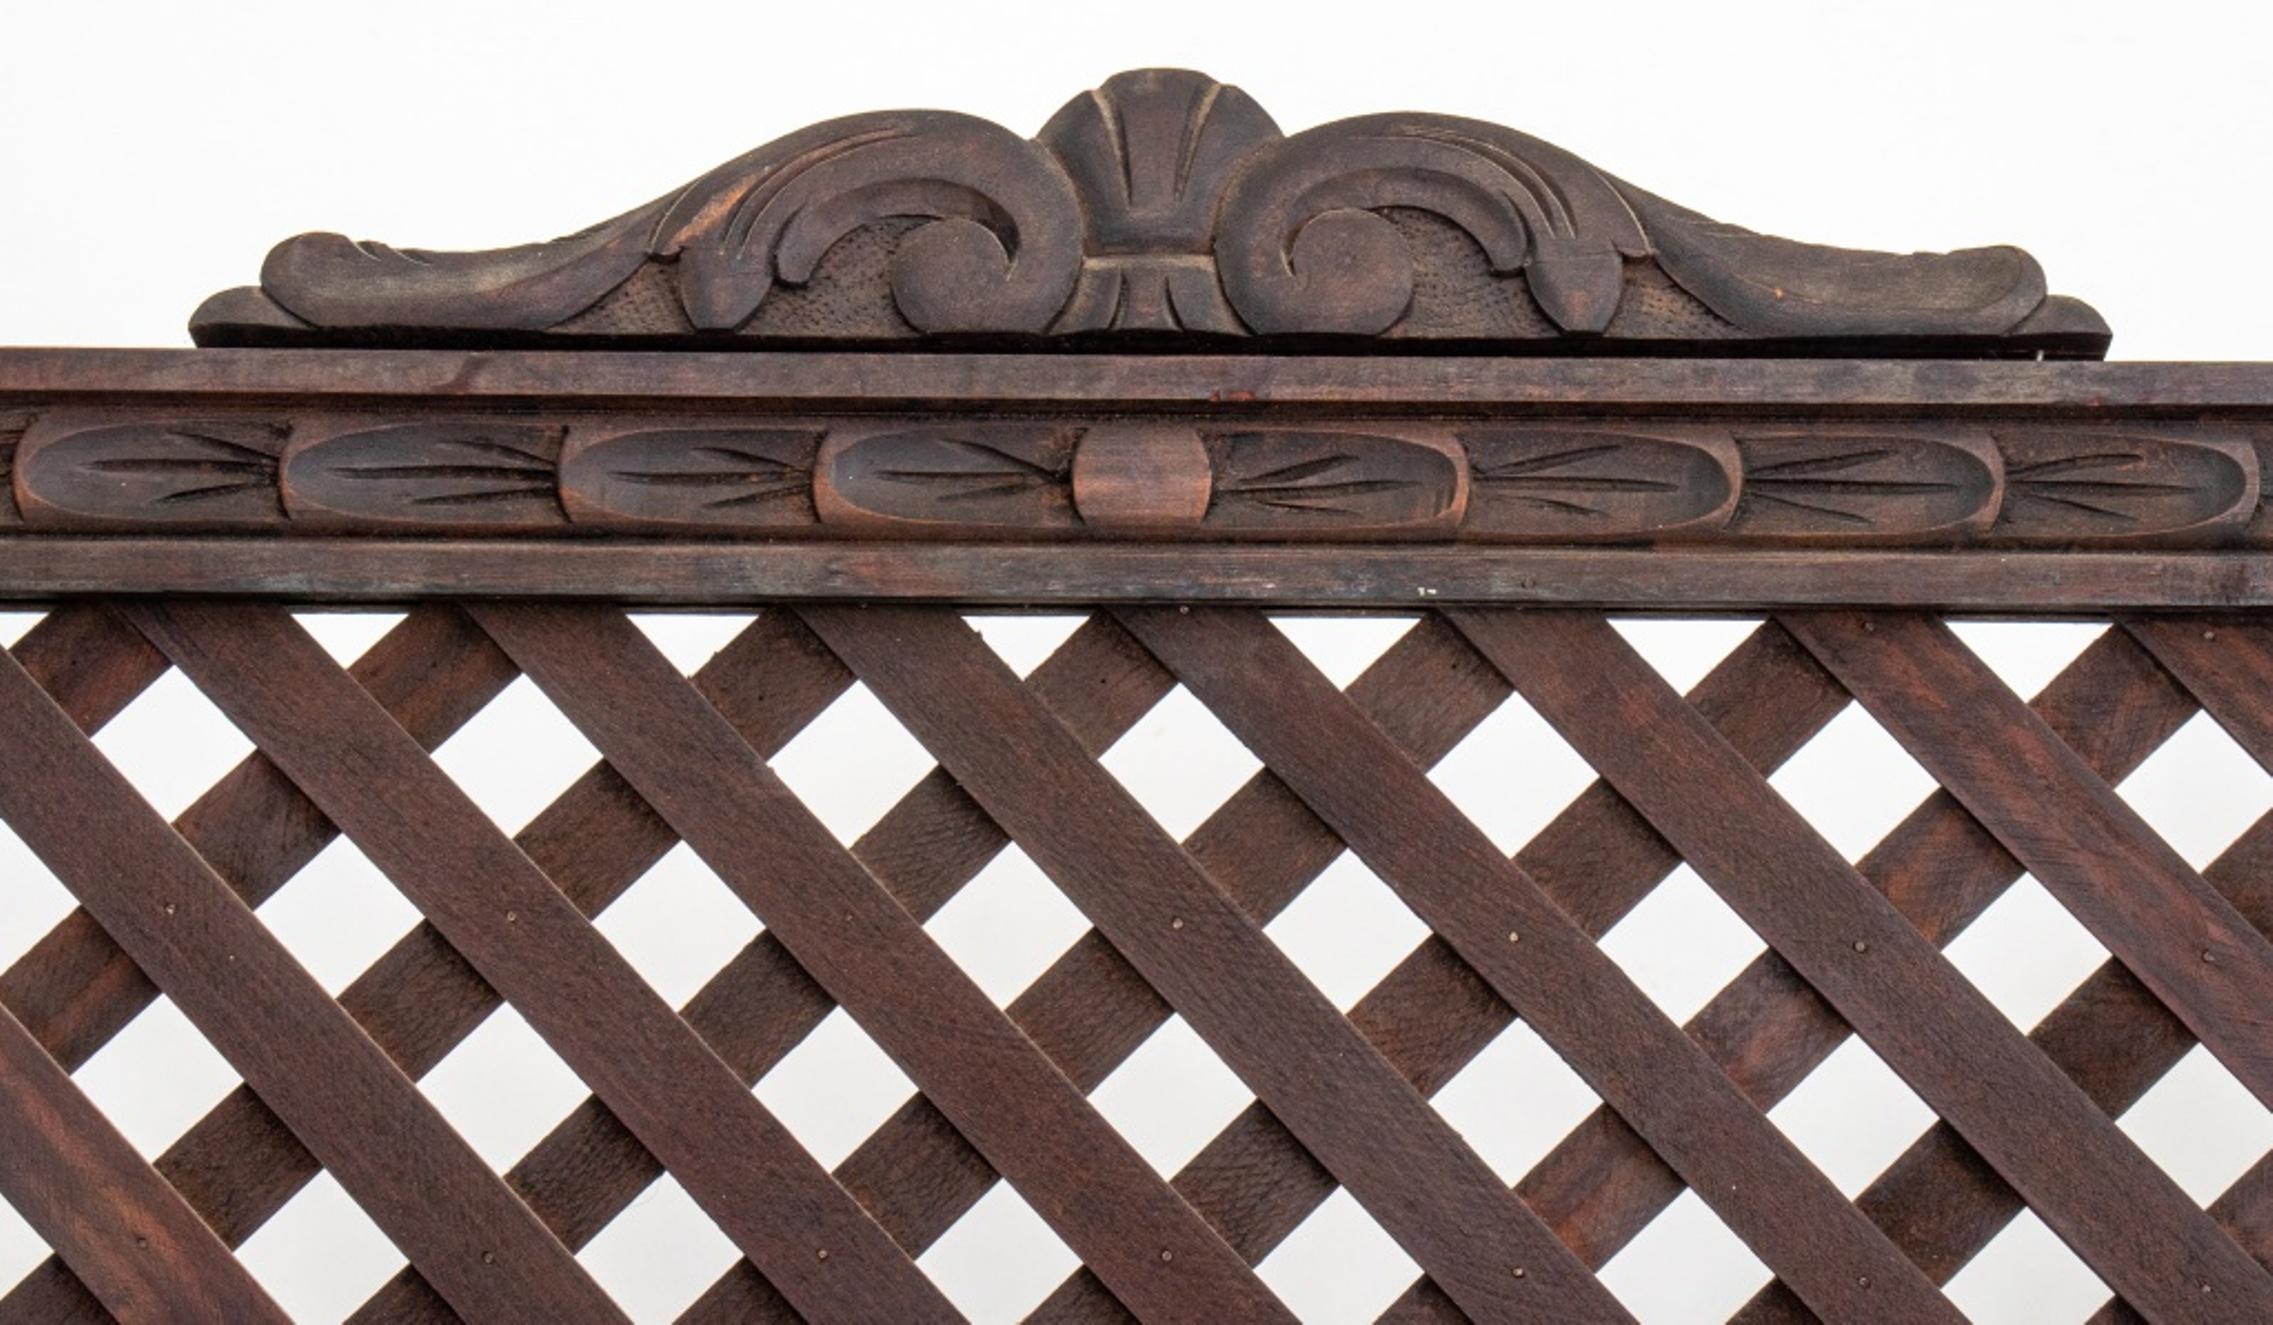 Anglo Indian wooden lattice three panel screen, each panel with scrolling crestrail and finials above a latticework upper register atop nine paneled segments with leaf-carved borders.

Dimensions: 70